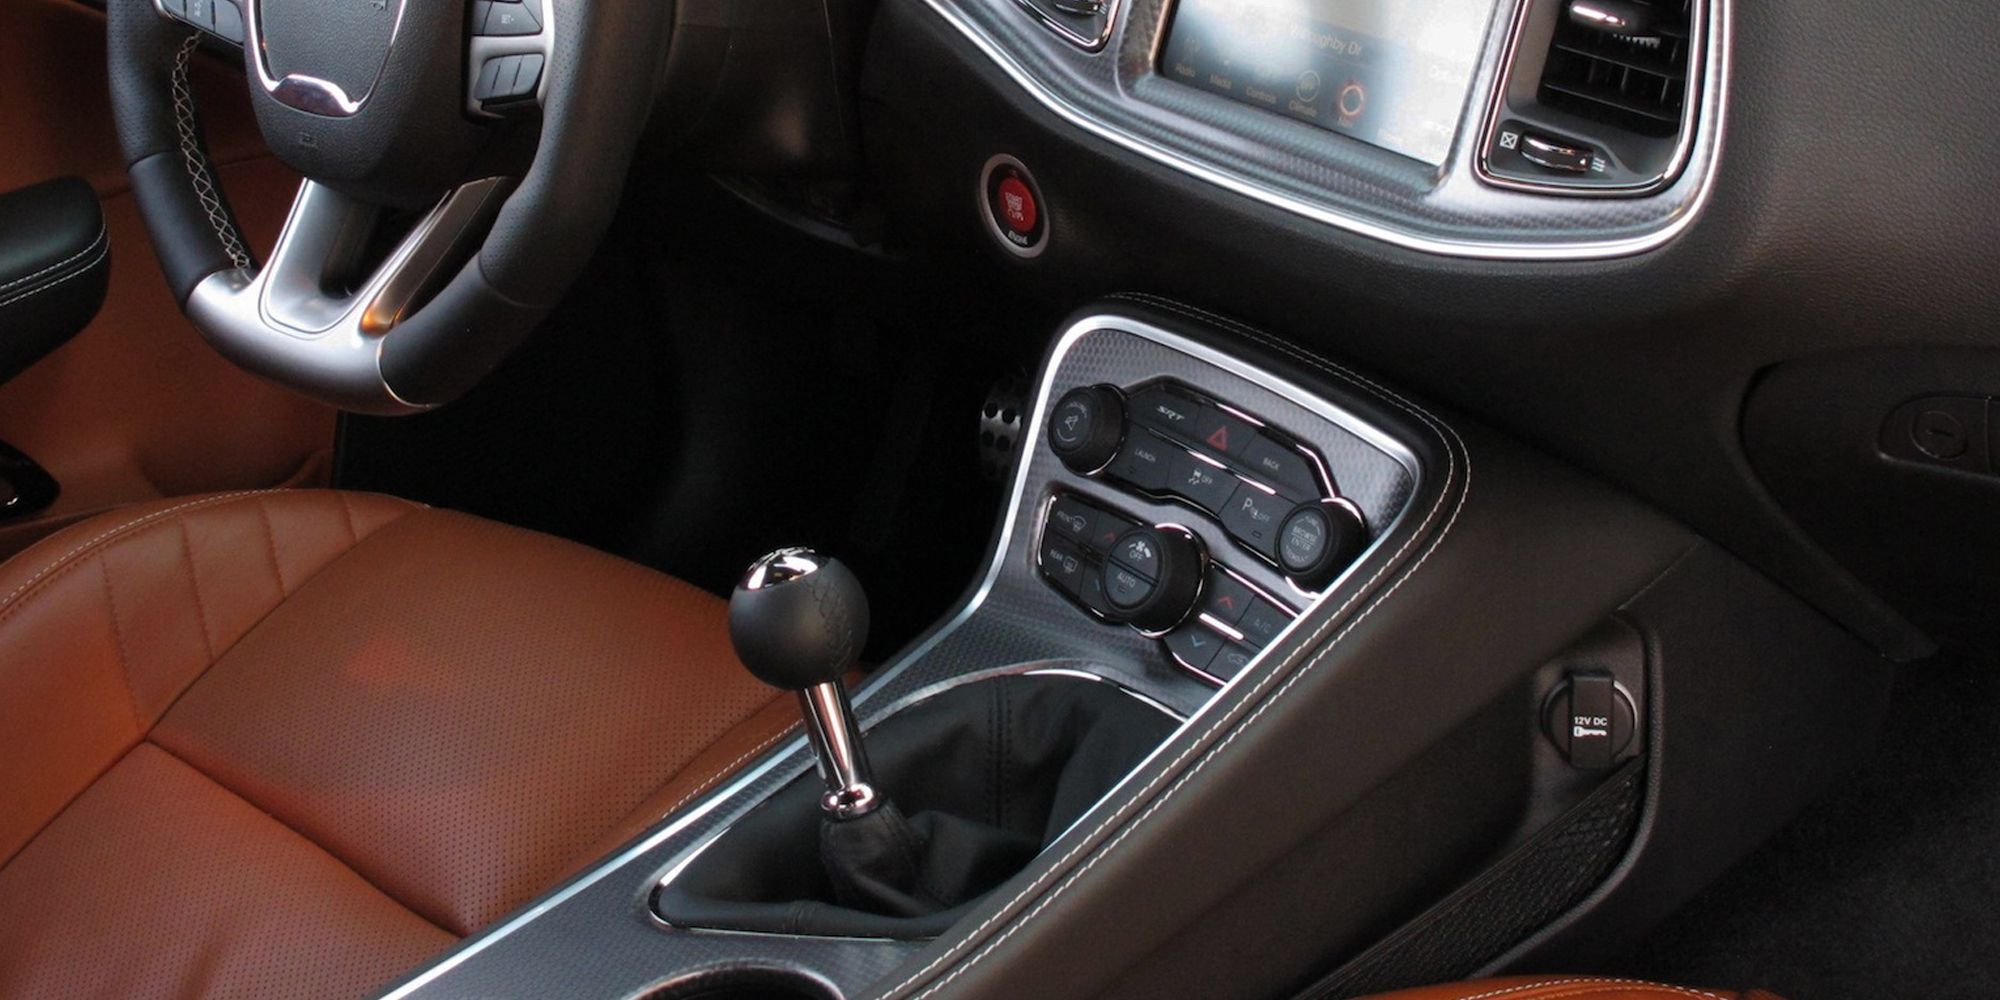 The shift lever in the Challenger, passenger side